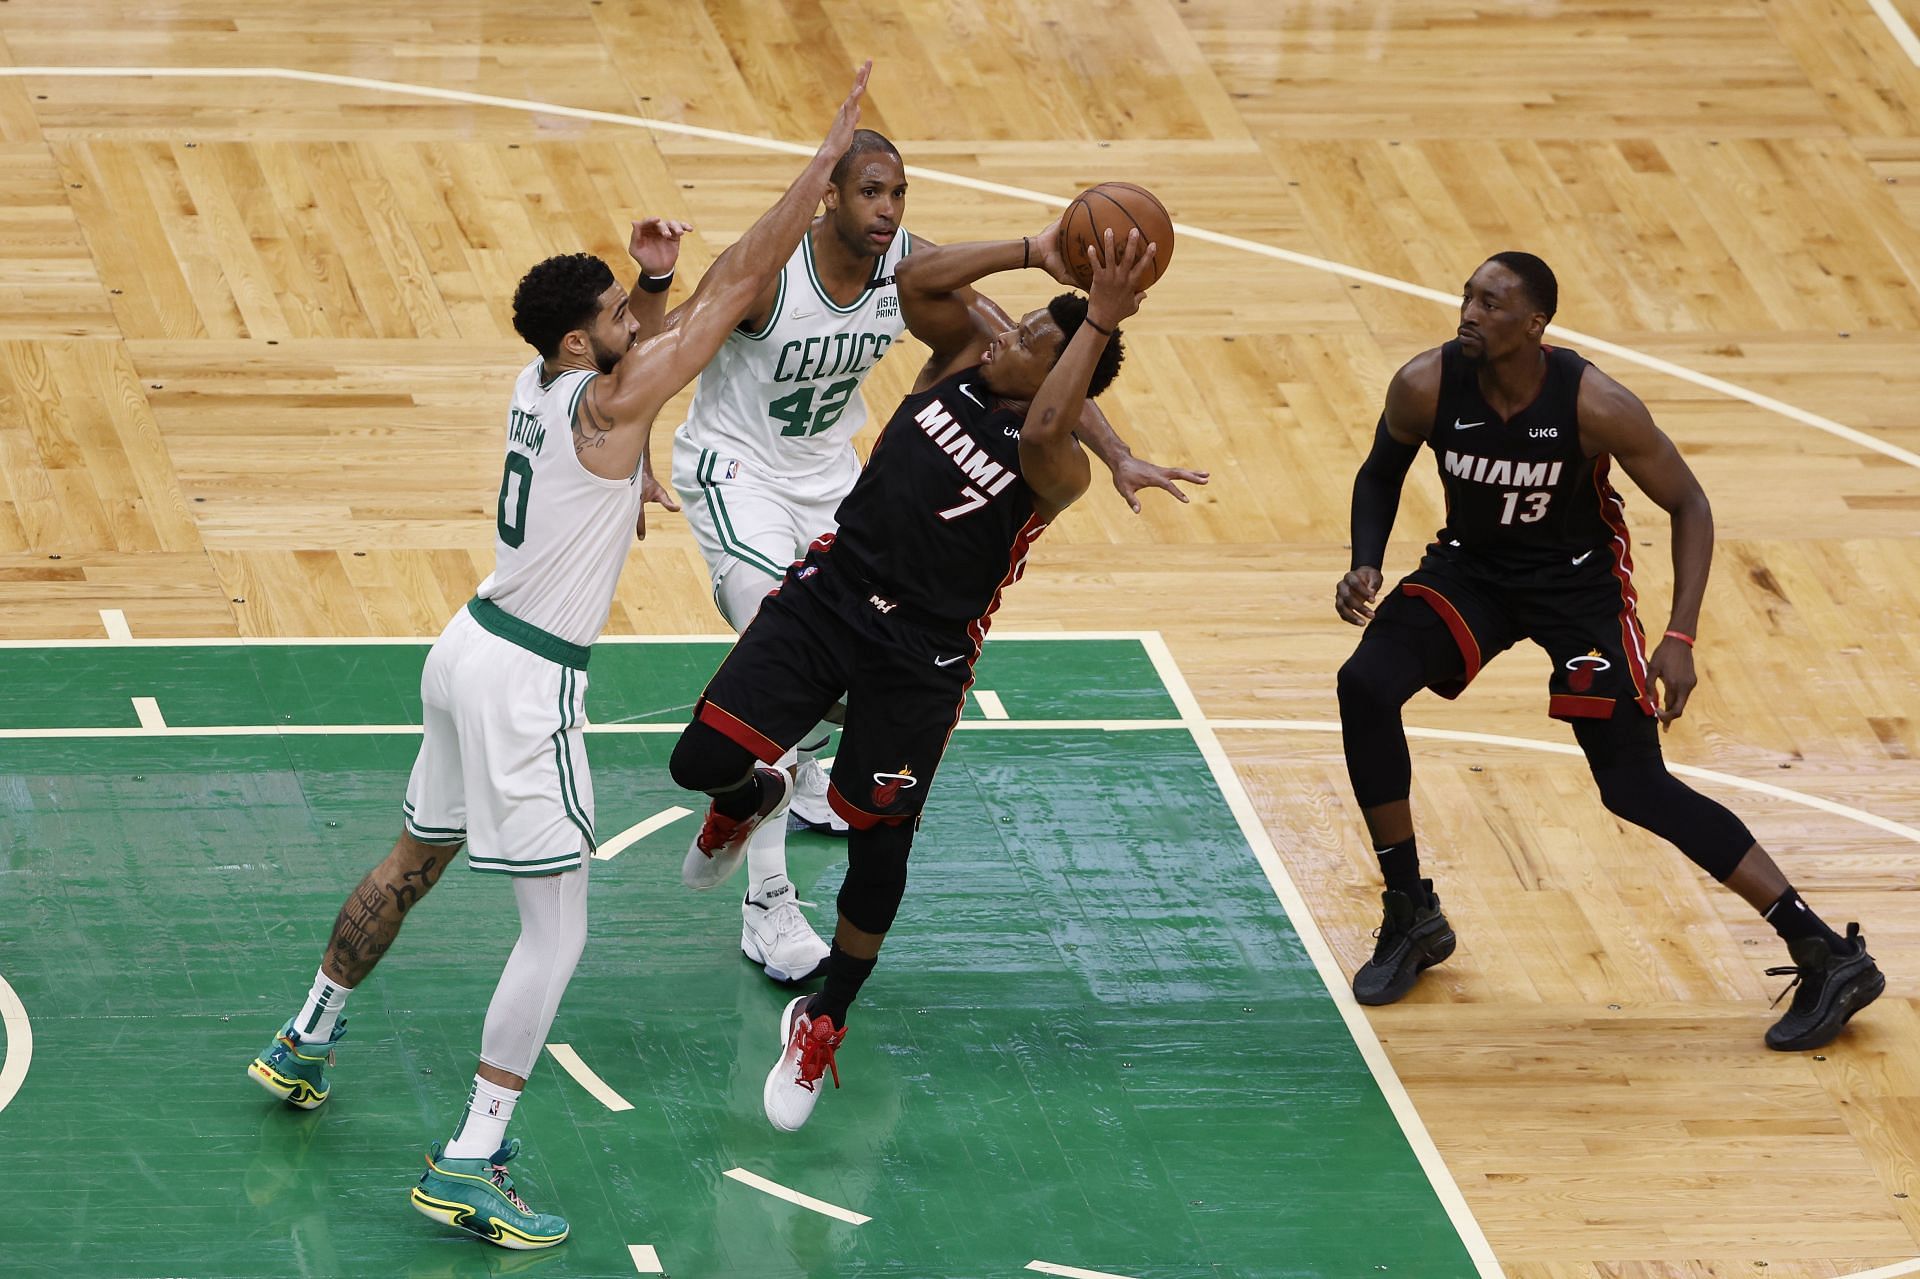 The Boston Celtics will host the Miami Heat for Game 4 on May 23rd